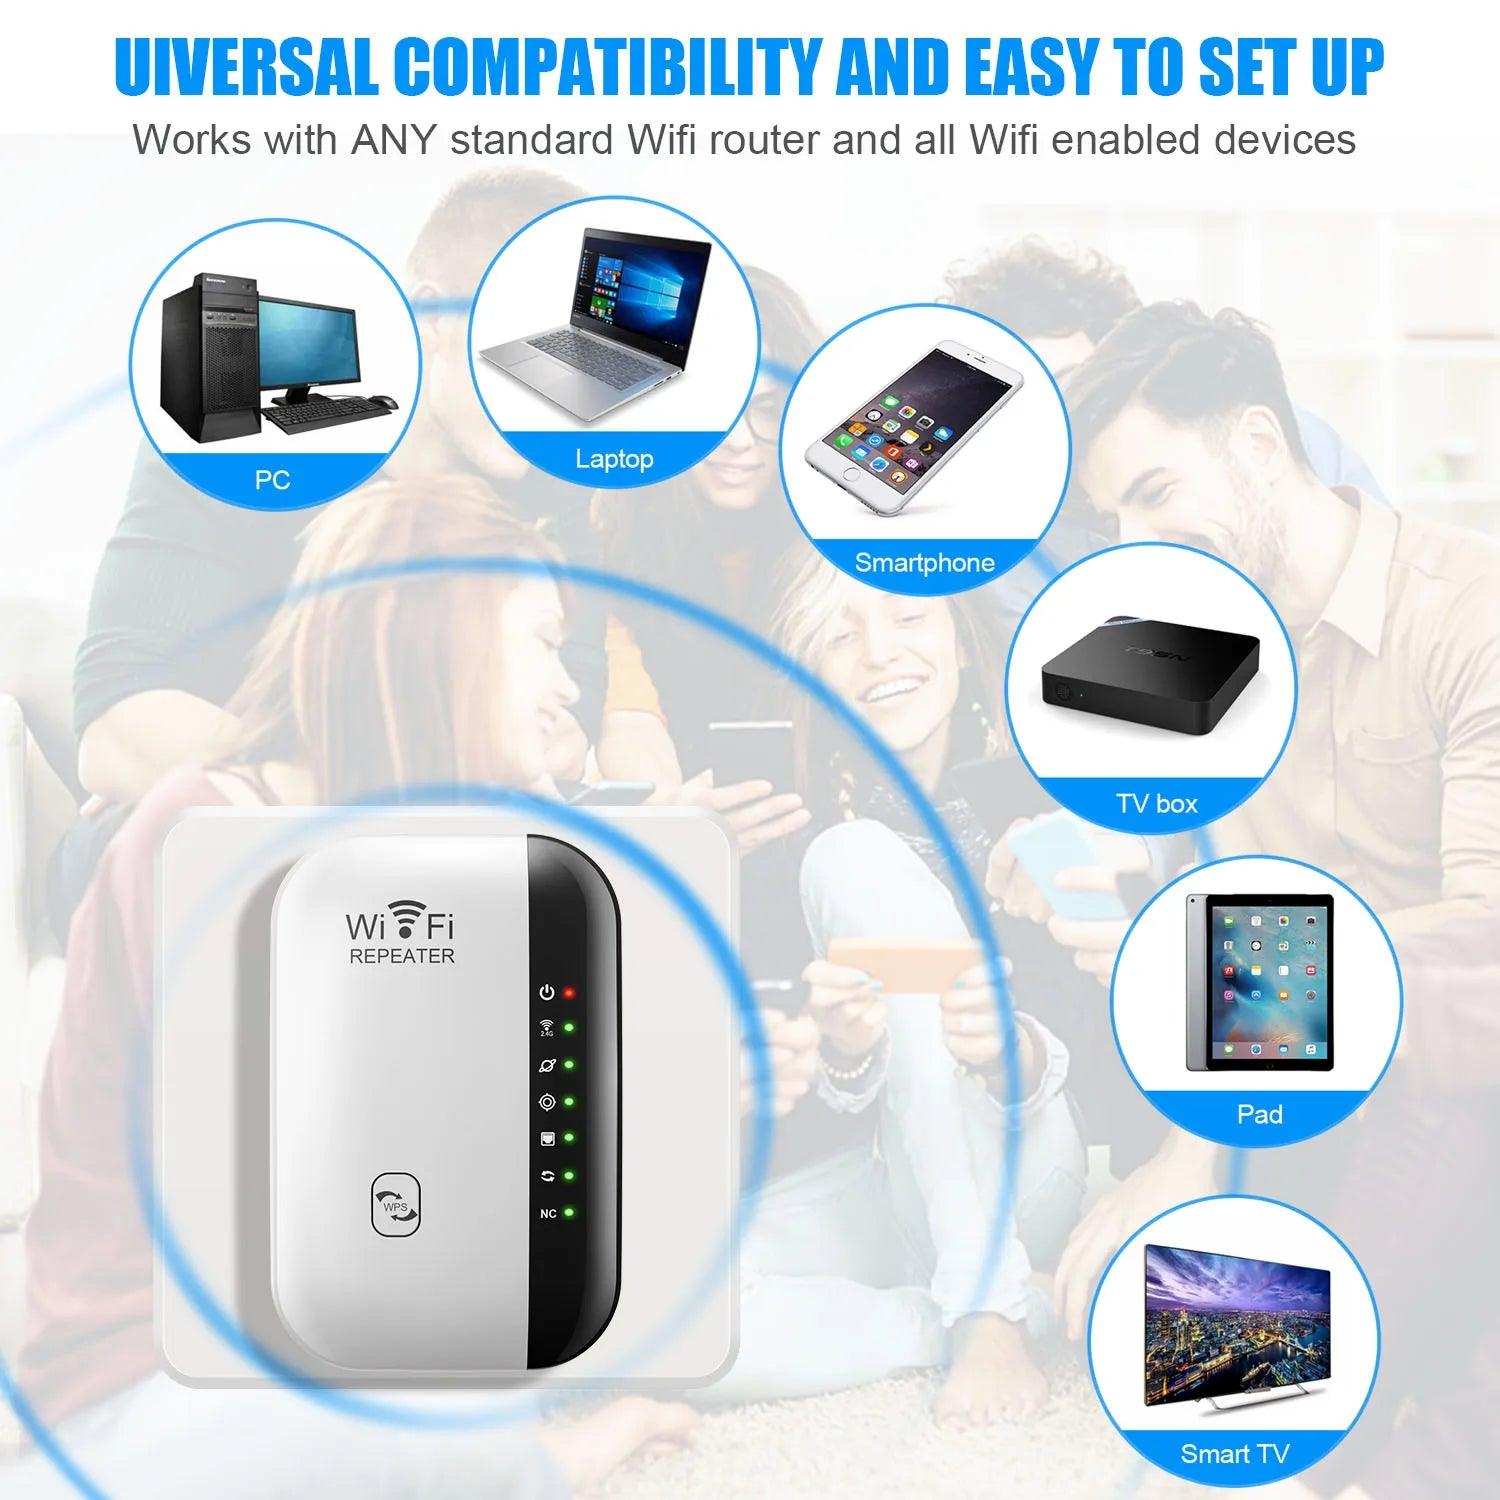 Enhance Your Wireless Network with the 300Mbps Wi-Fi Signal Booster and Range Extender for PC  ourlum.com   